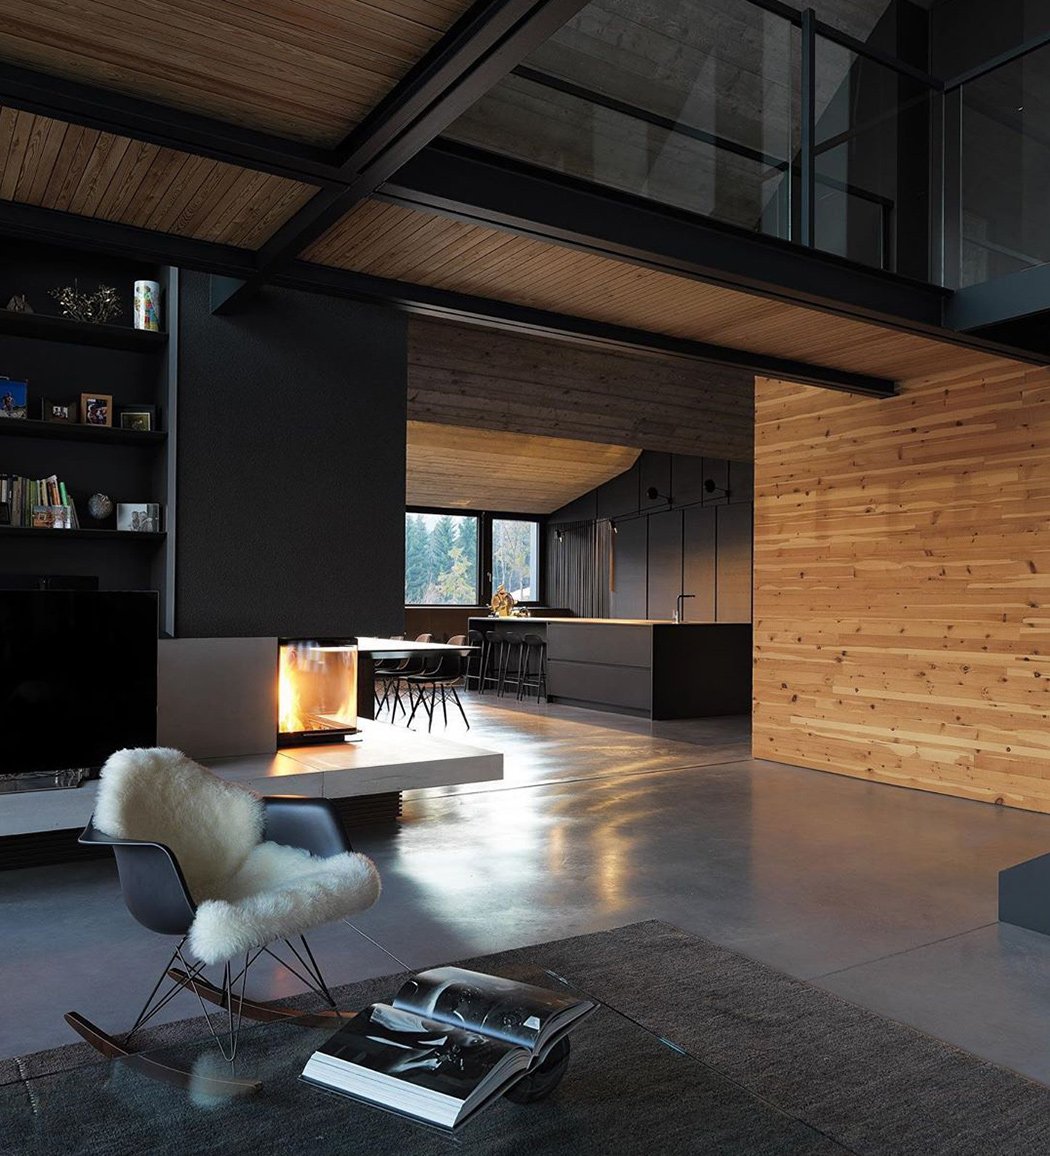 All black interior designs that will inspire you to adapt this